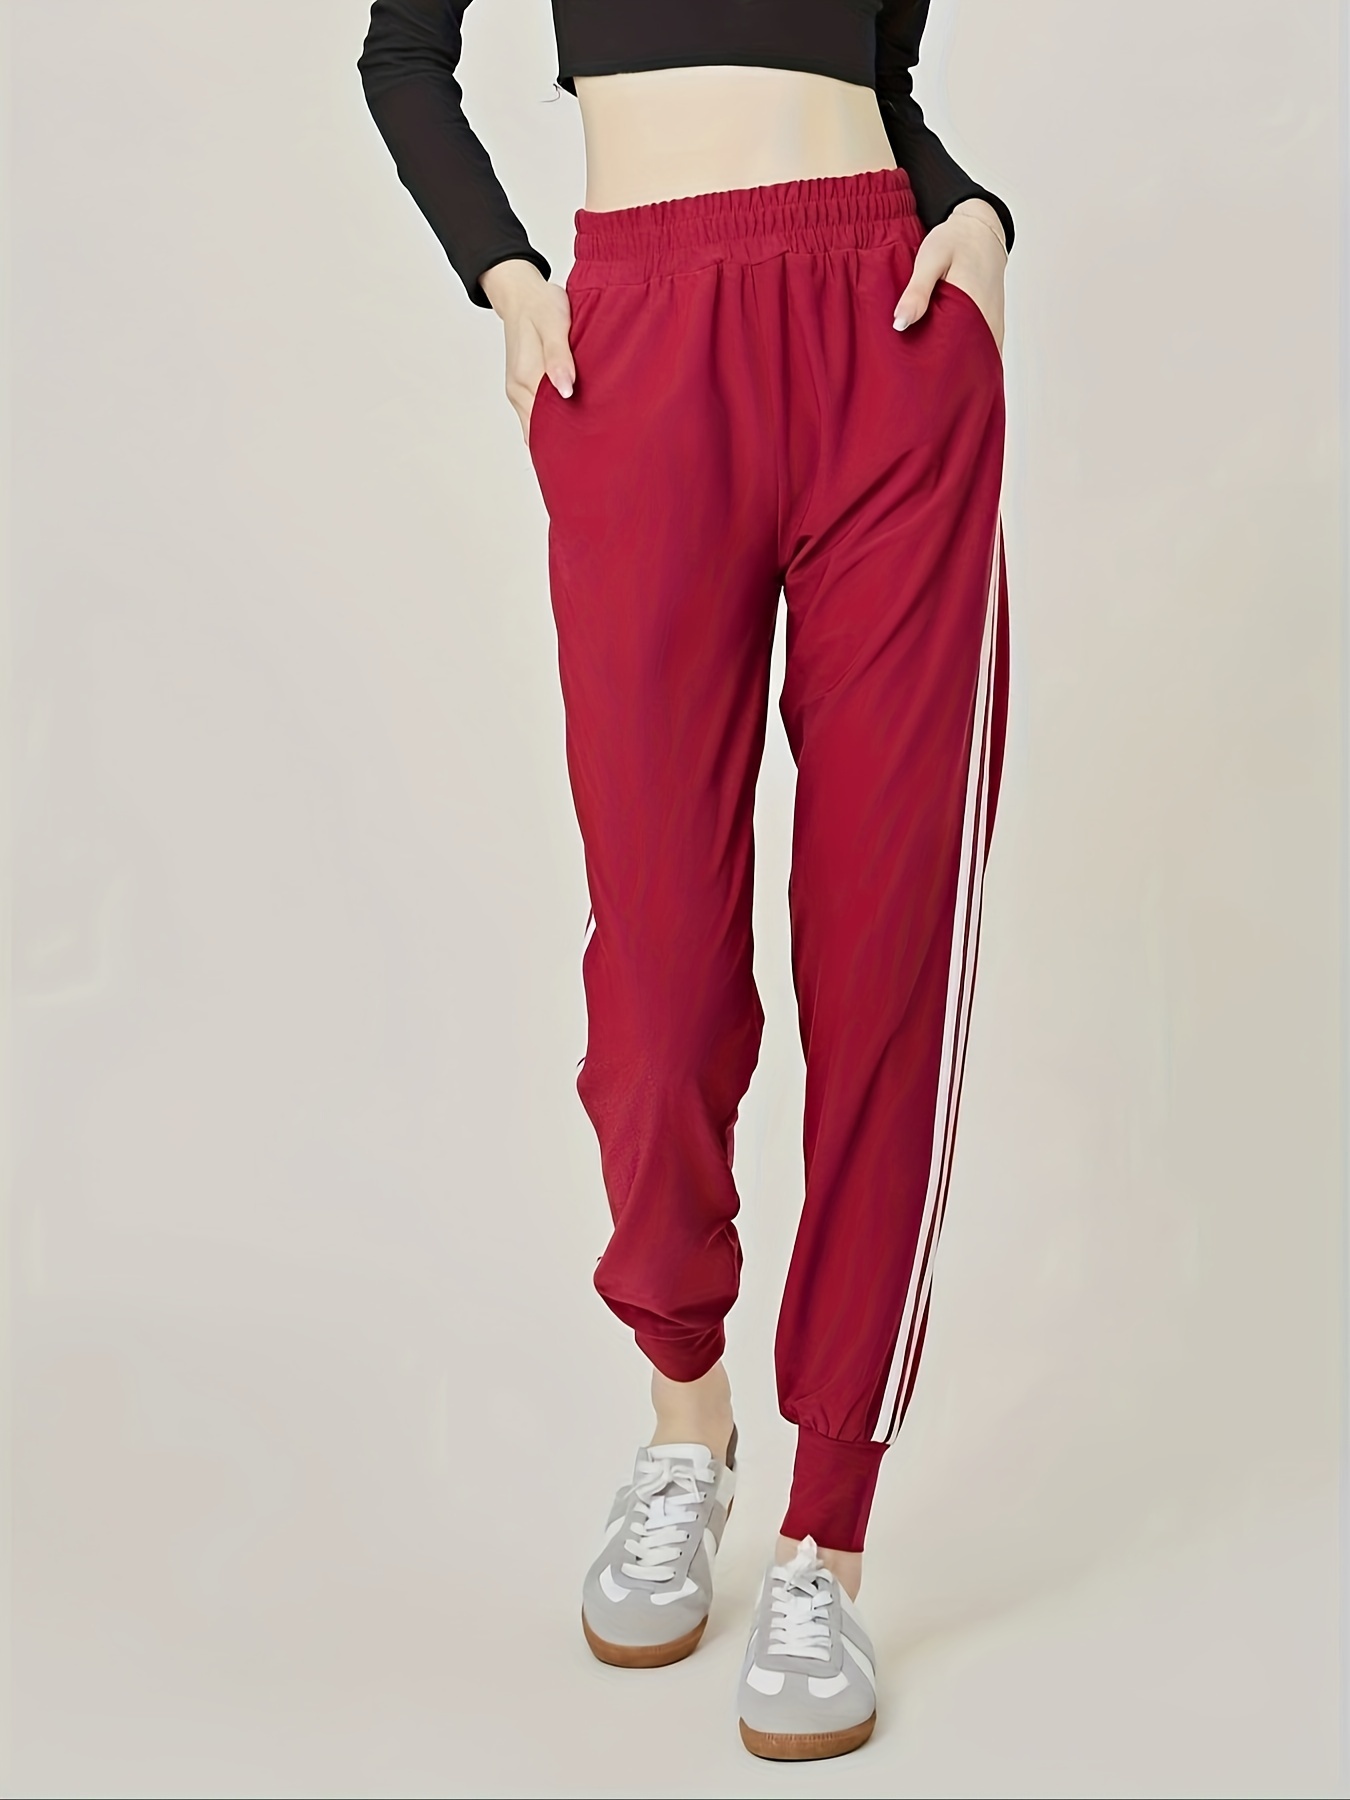 Womens Cinch Bottom Sweatpants With Pockets Striped Side Mid Waist Jogger  Pants Casual Workout Pants, Shop The Latest Trends